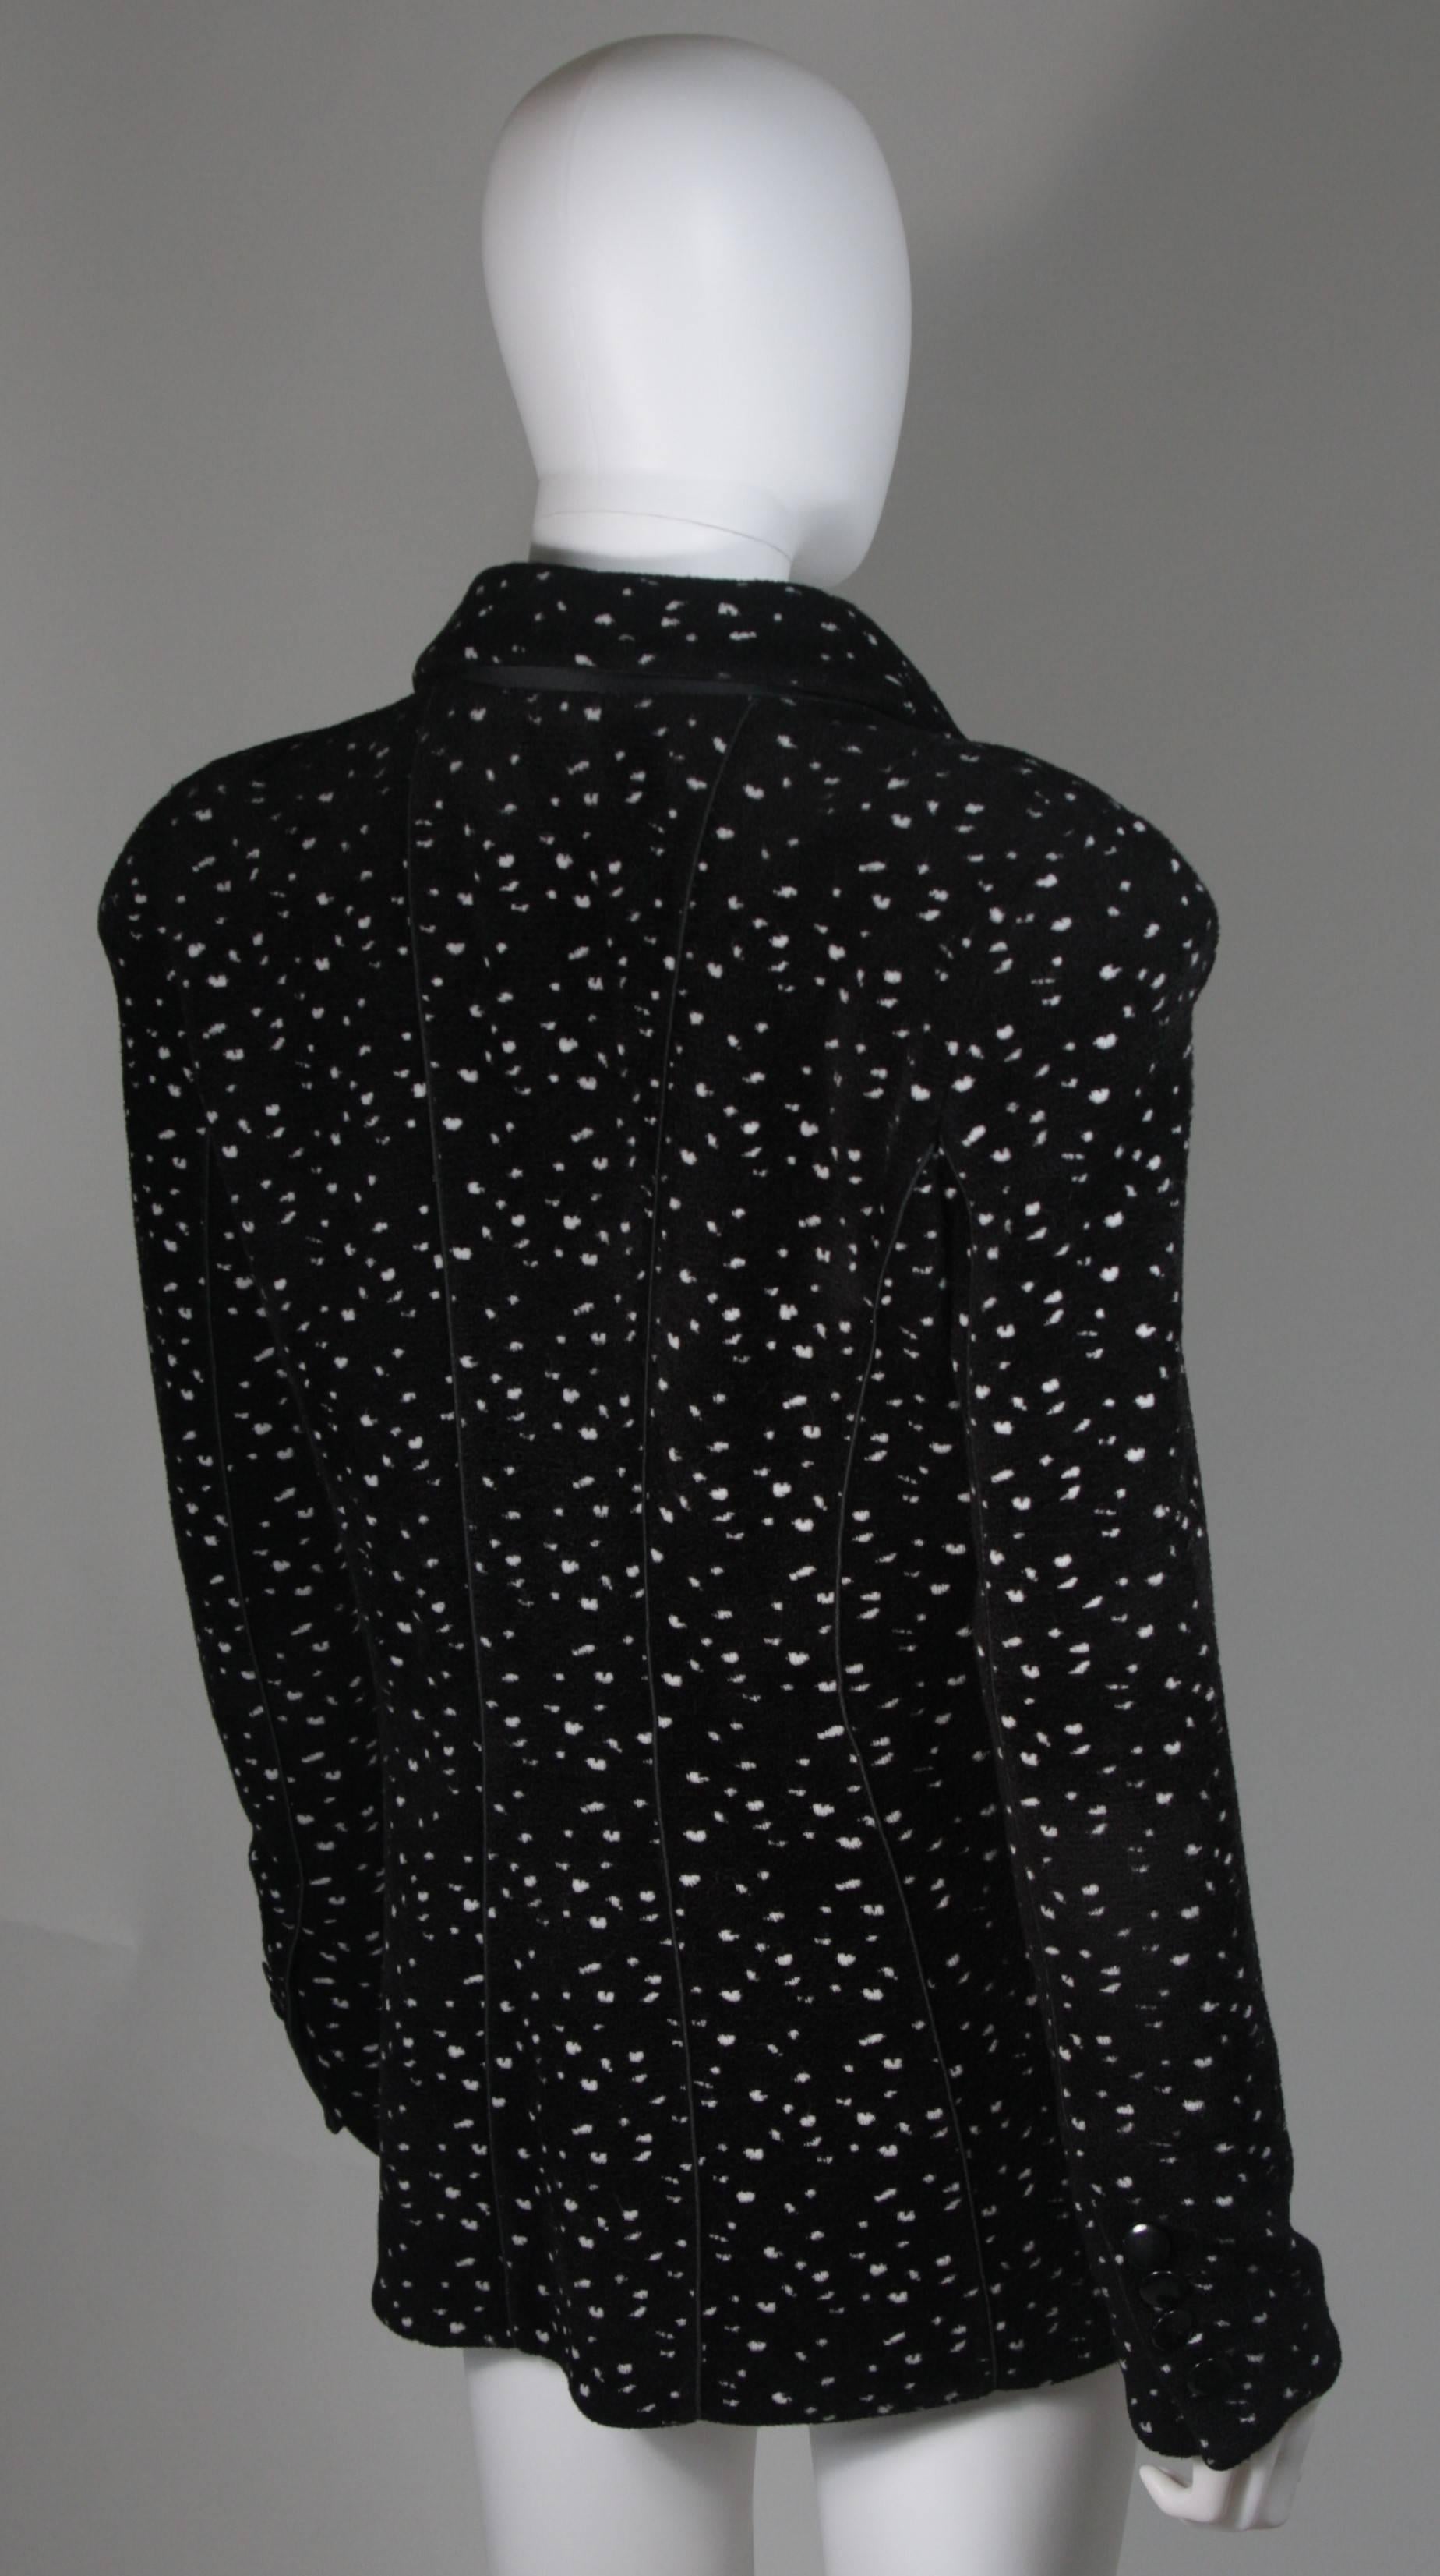 Giorgio Armani Black and White Speckle Wool Blend Jacket with Piping Size 46 In Excellent Condition For Sale In Los Angeles, CA